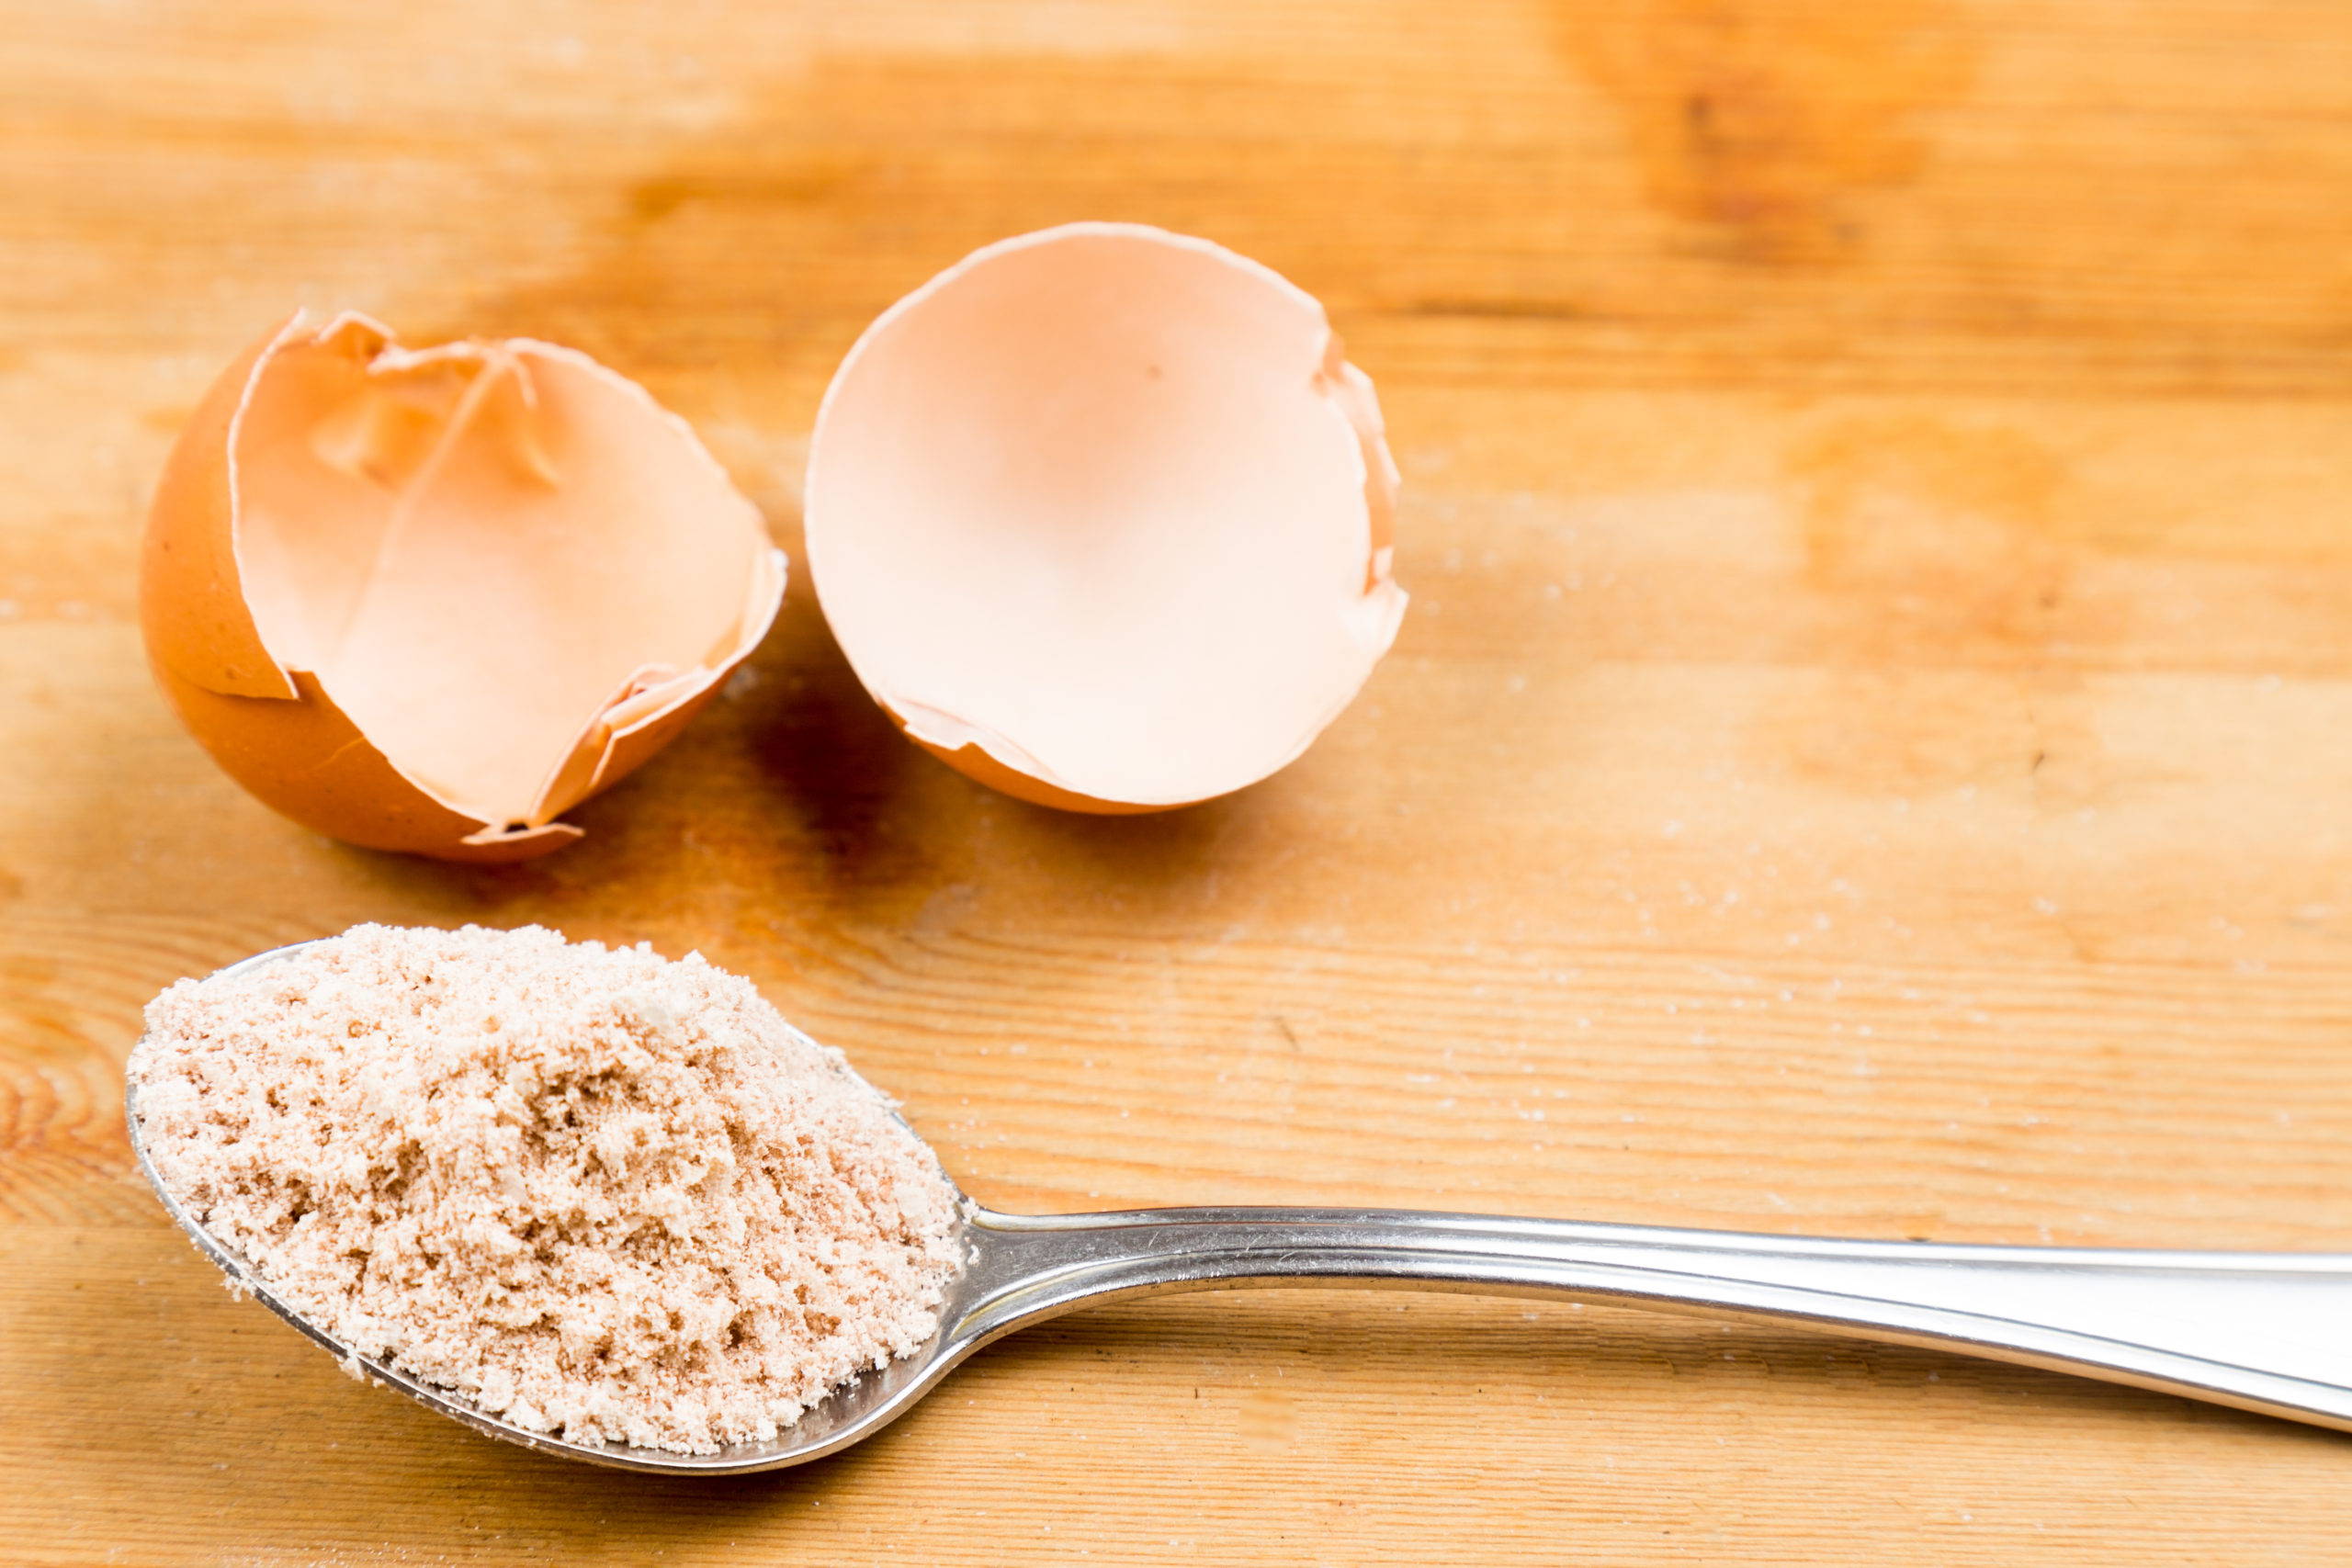 A heaped spoon of sand and an empty cracked egg on a table